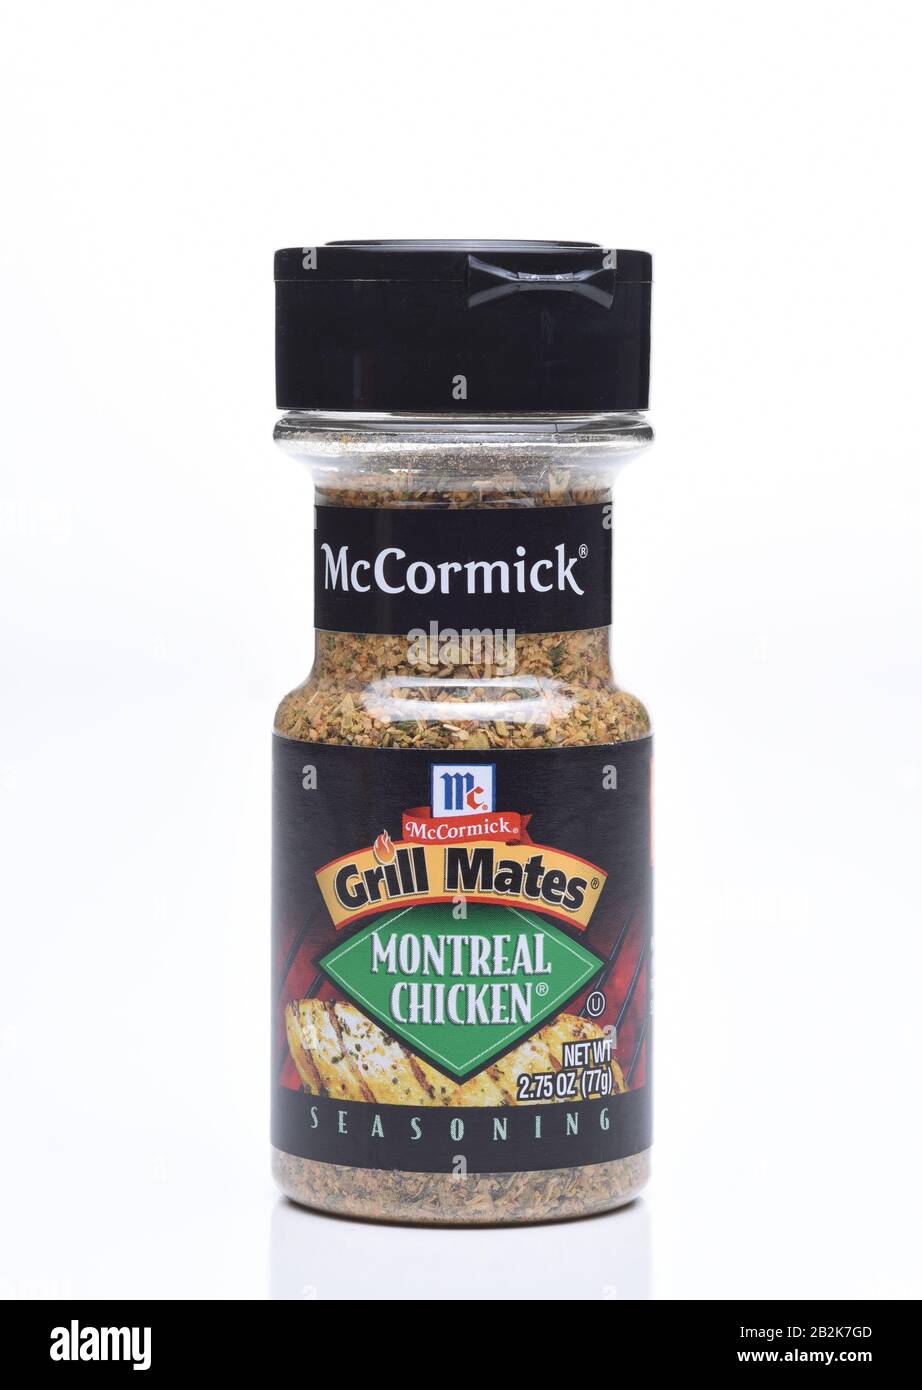 IRVINE, CALIFORNIA - DEC 4, 2018: A jar of  McCormick Grill Mates Montreal Chicken seasoning, a blend of garlic and herbs to liven up the flavor of gr Stock Photo